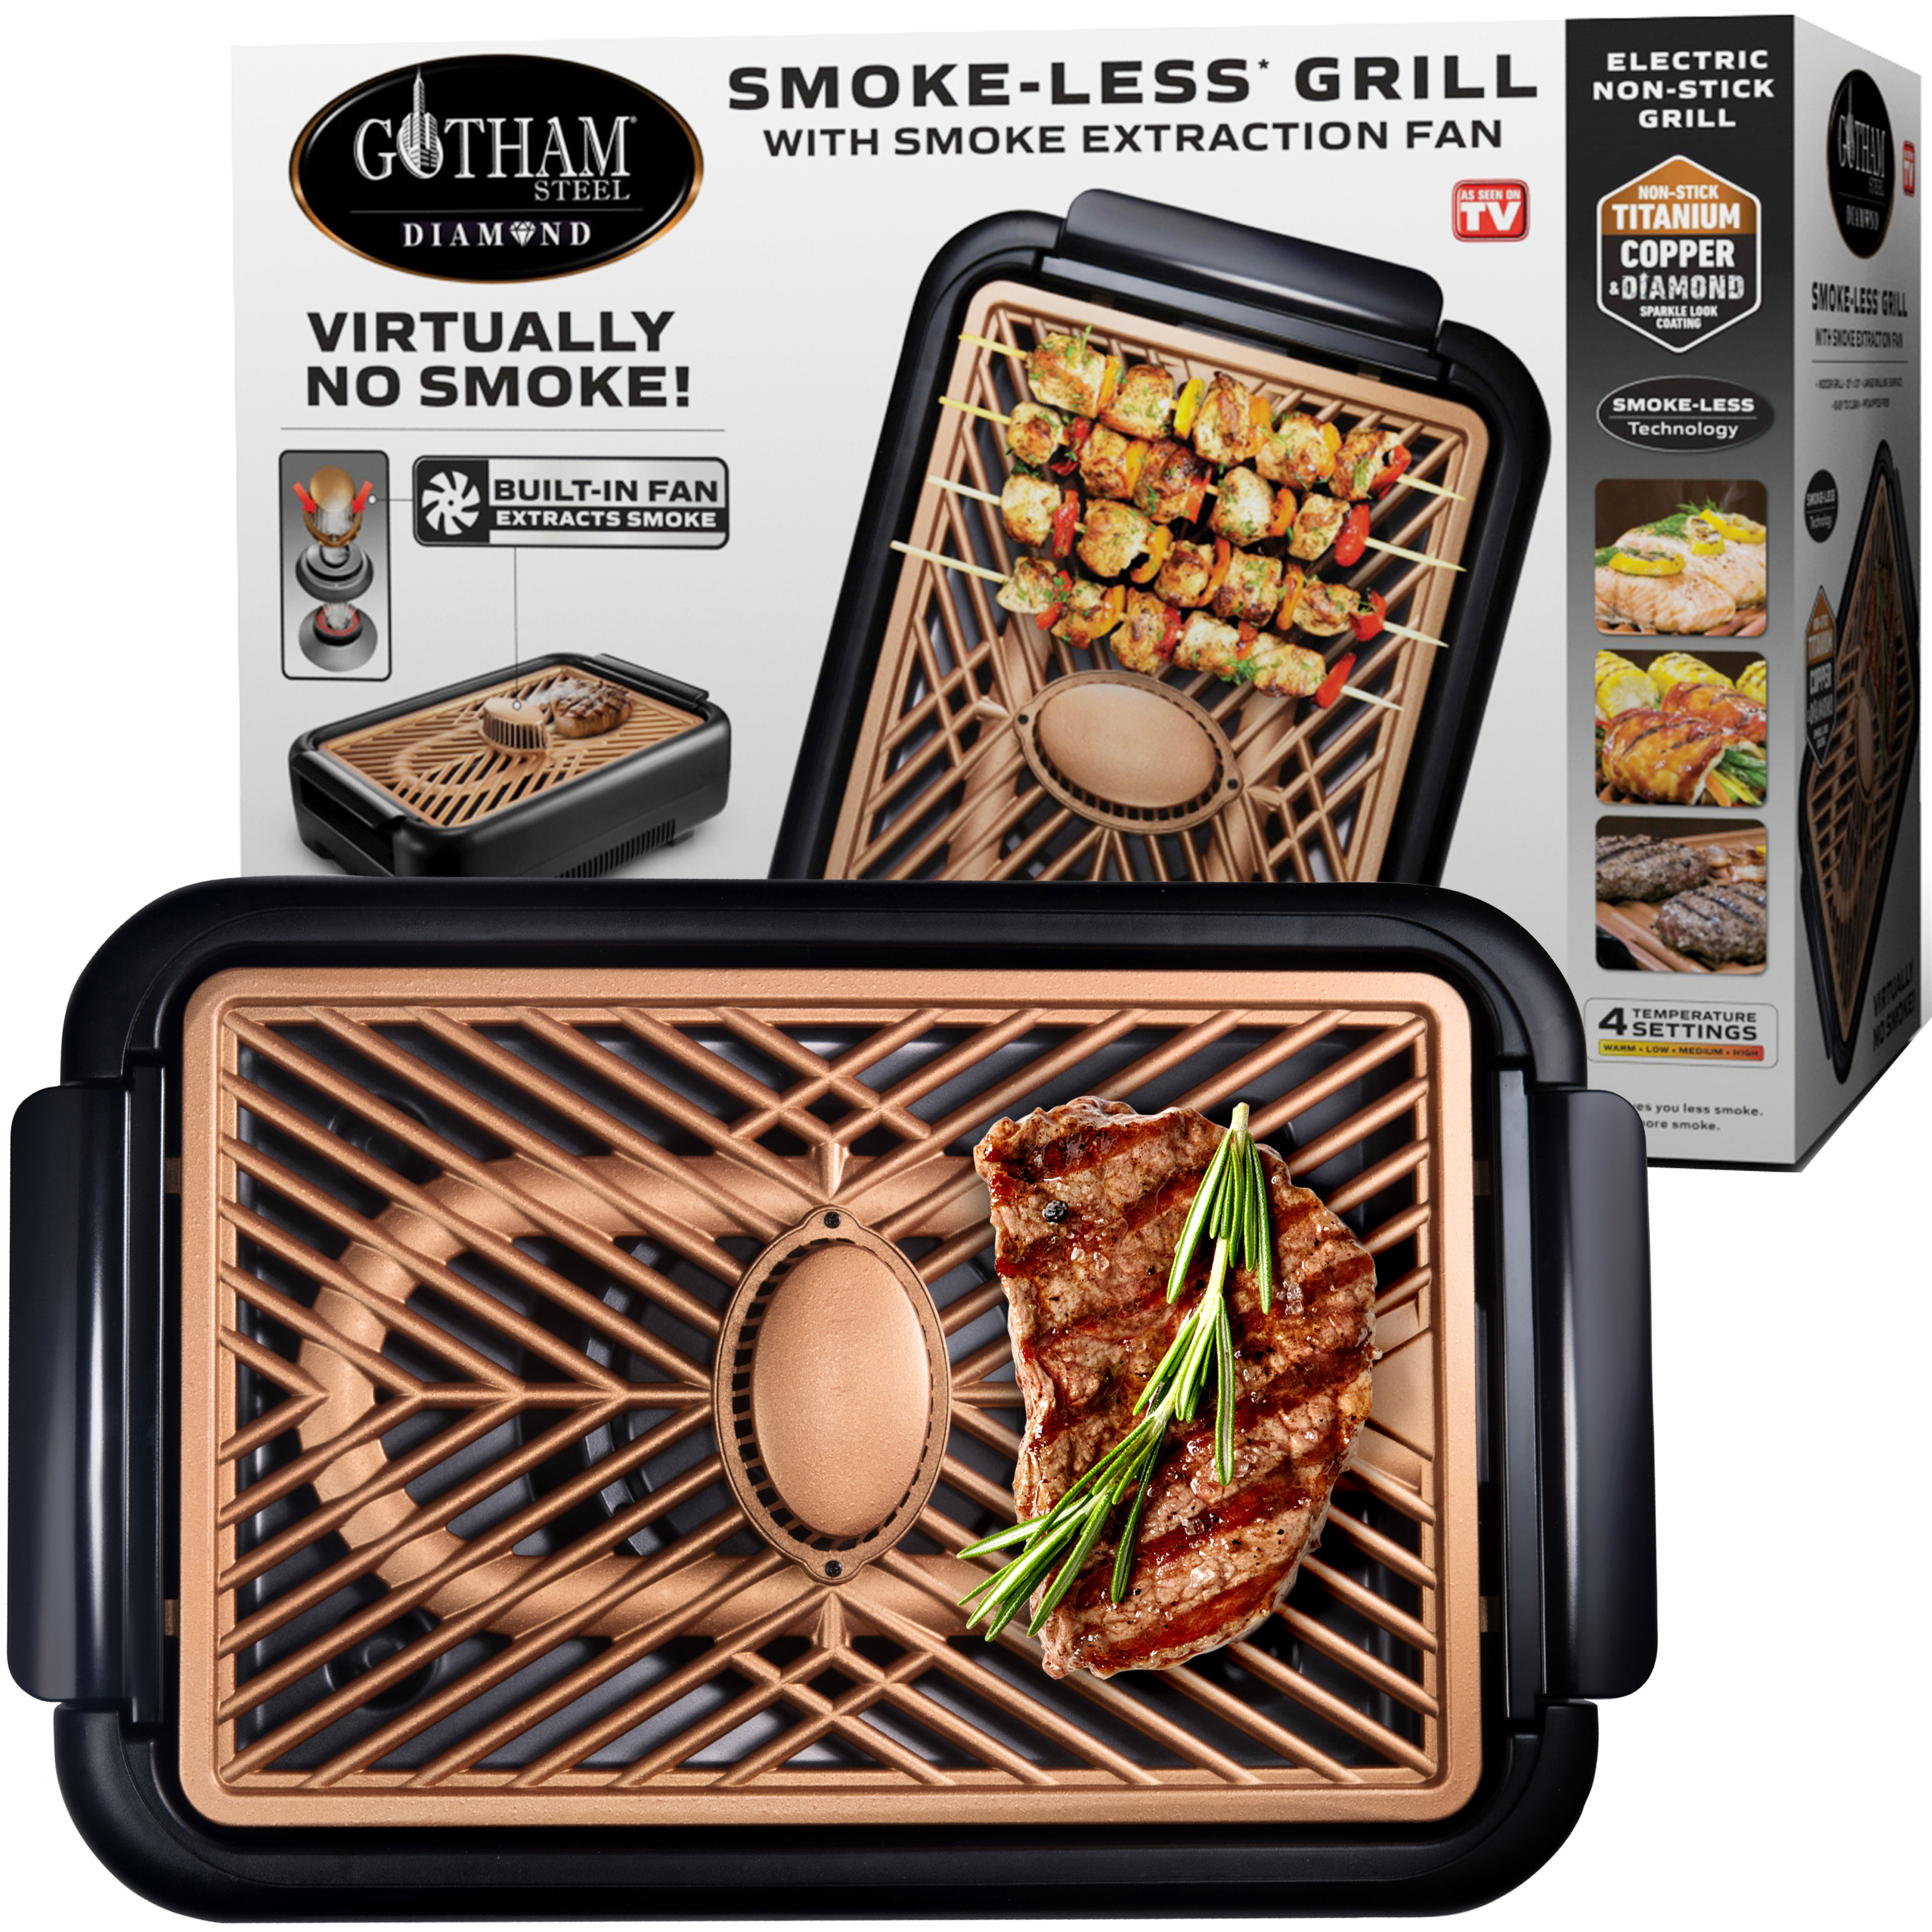 Gotham Steel Smokeless Grill with Fan Indoor Grill Nonstick Electric Grill BBQ Grill As Seen on TV - image 1 of 7